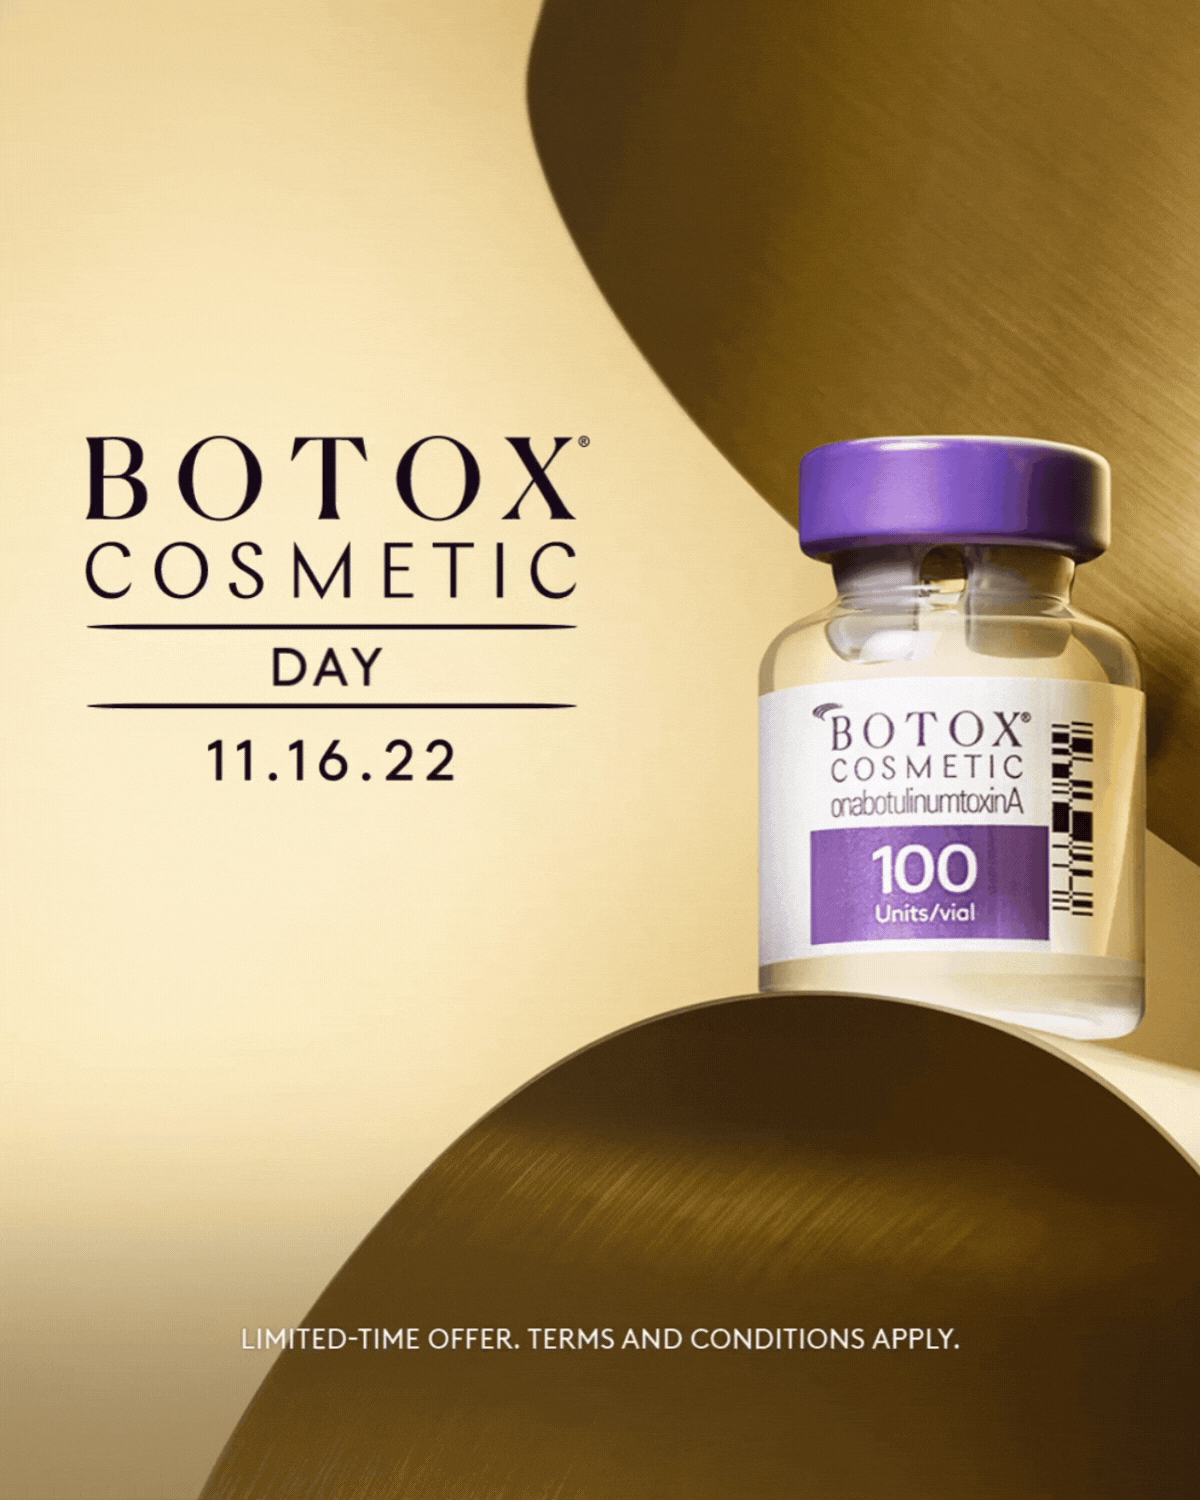 Botox Day 2022 Instruction Checklist for How to purchase Alle gift cards for BOGO offer